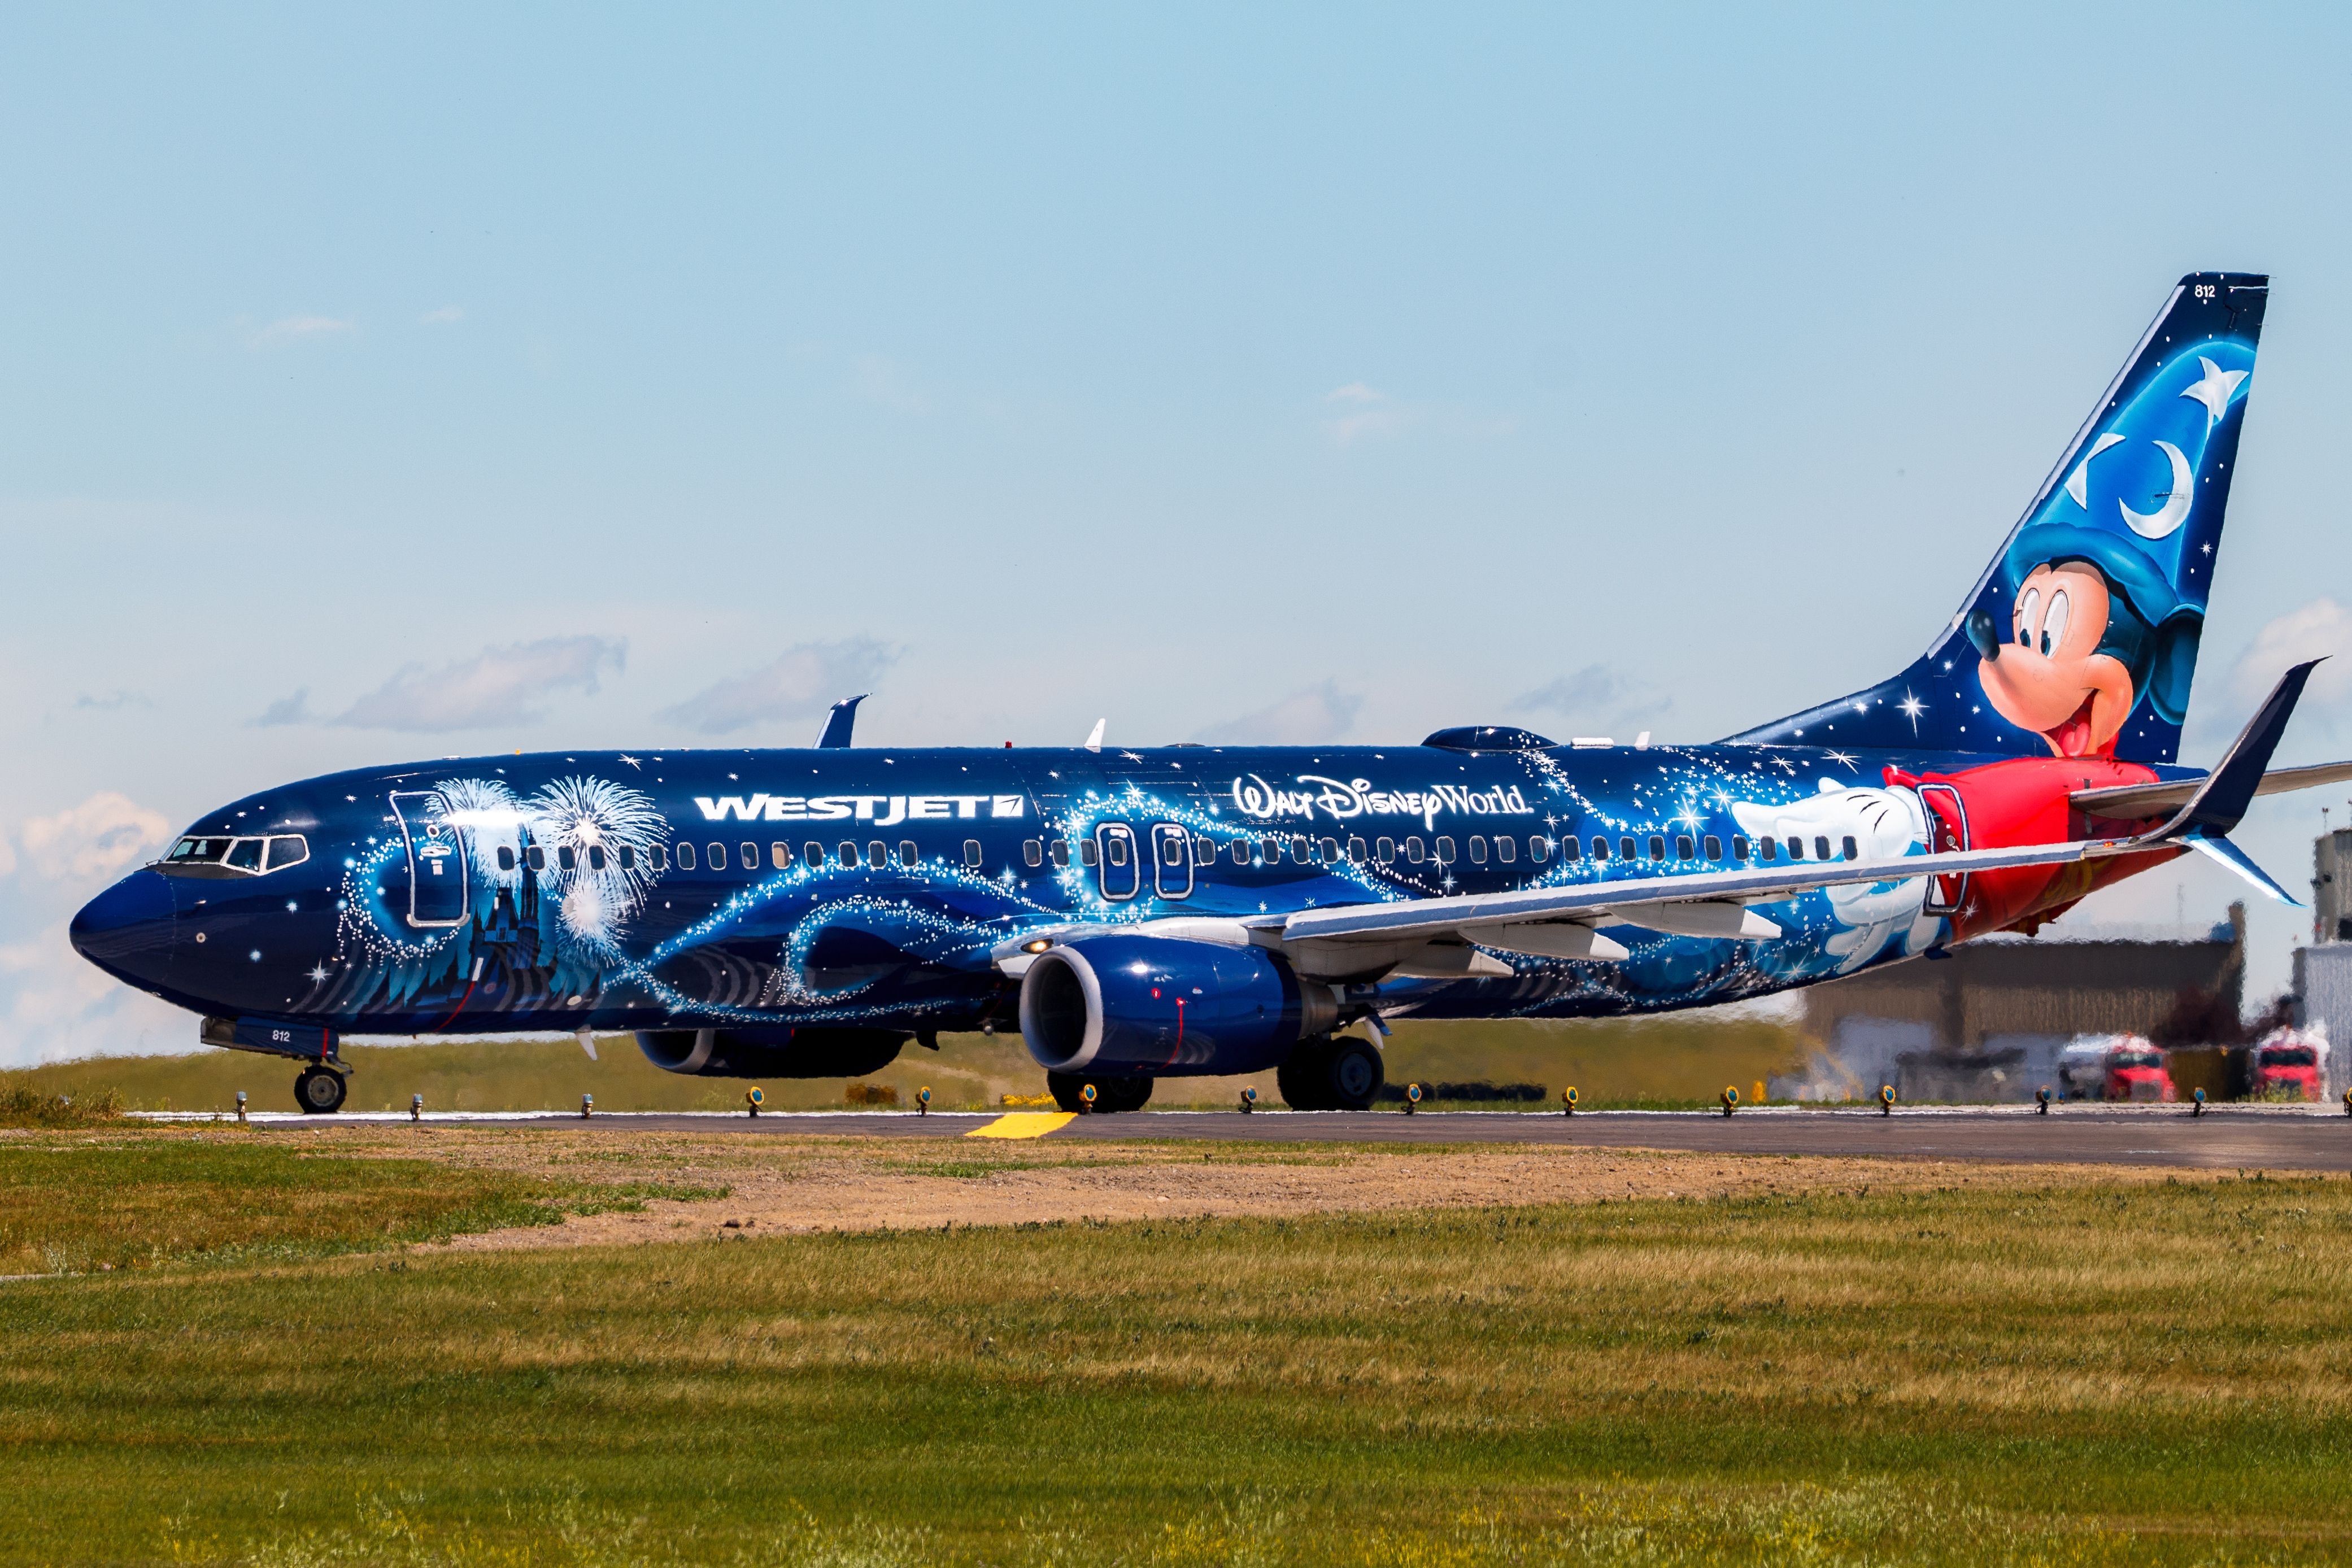 A Look At Azul's 3 Aircraft Painted With Disney's Livery